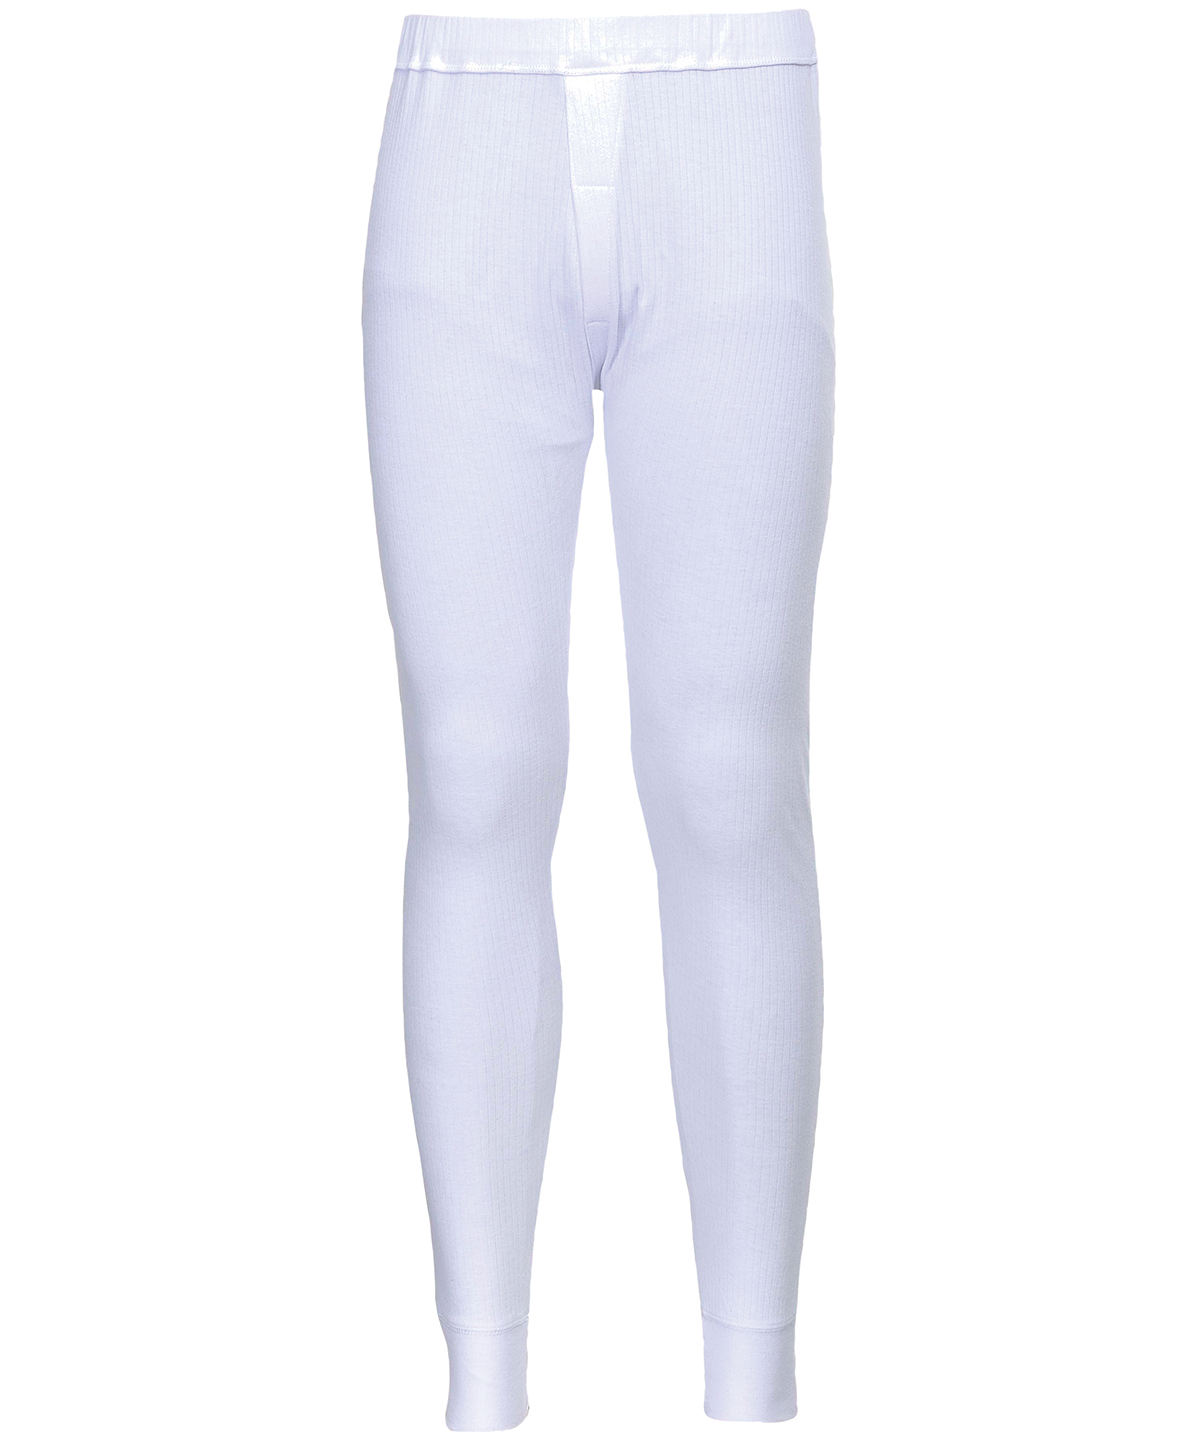 Thermal Trousers (B121) White Size 2XLarge